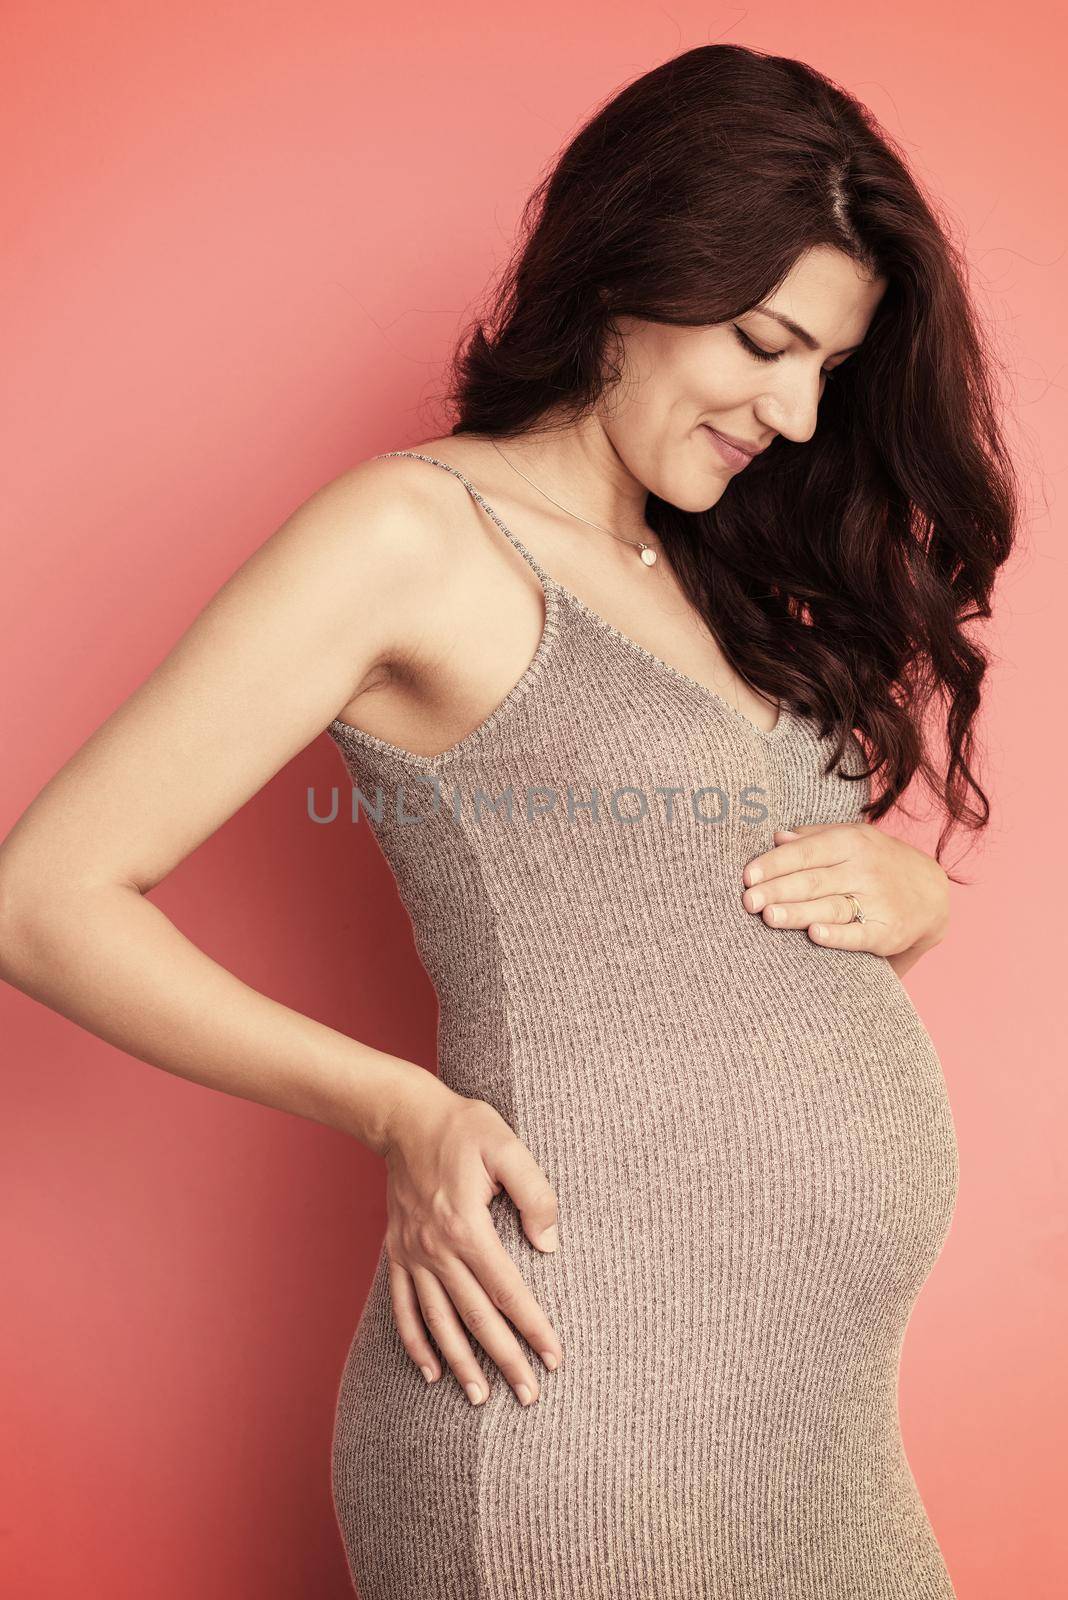 Portrait of pregnant woman over red background by dotshock